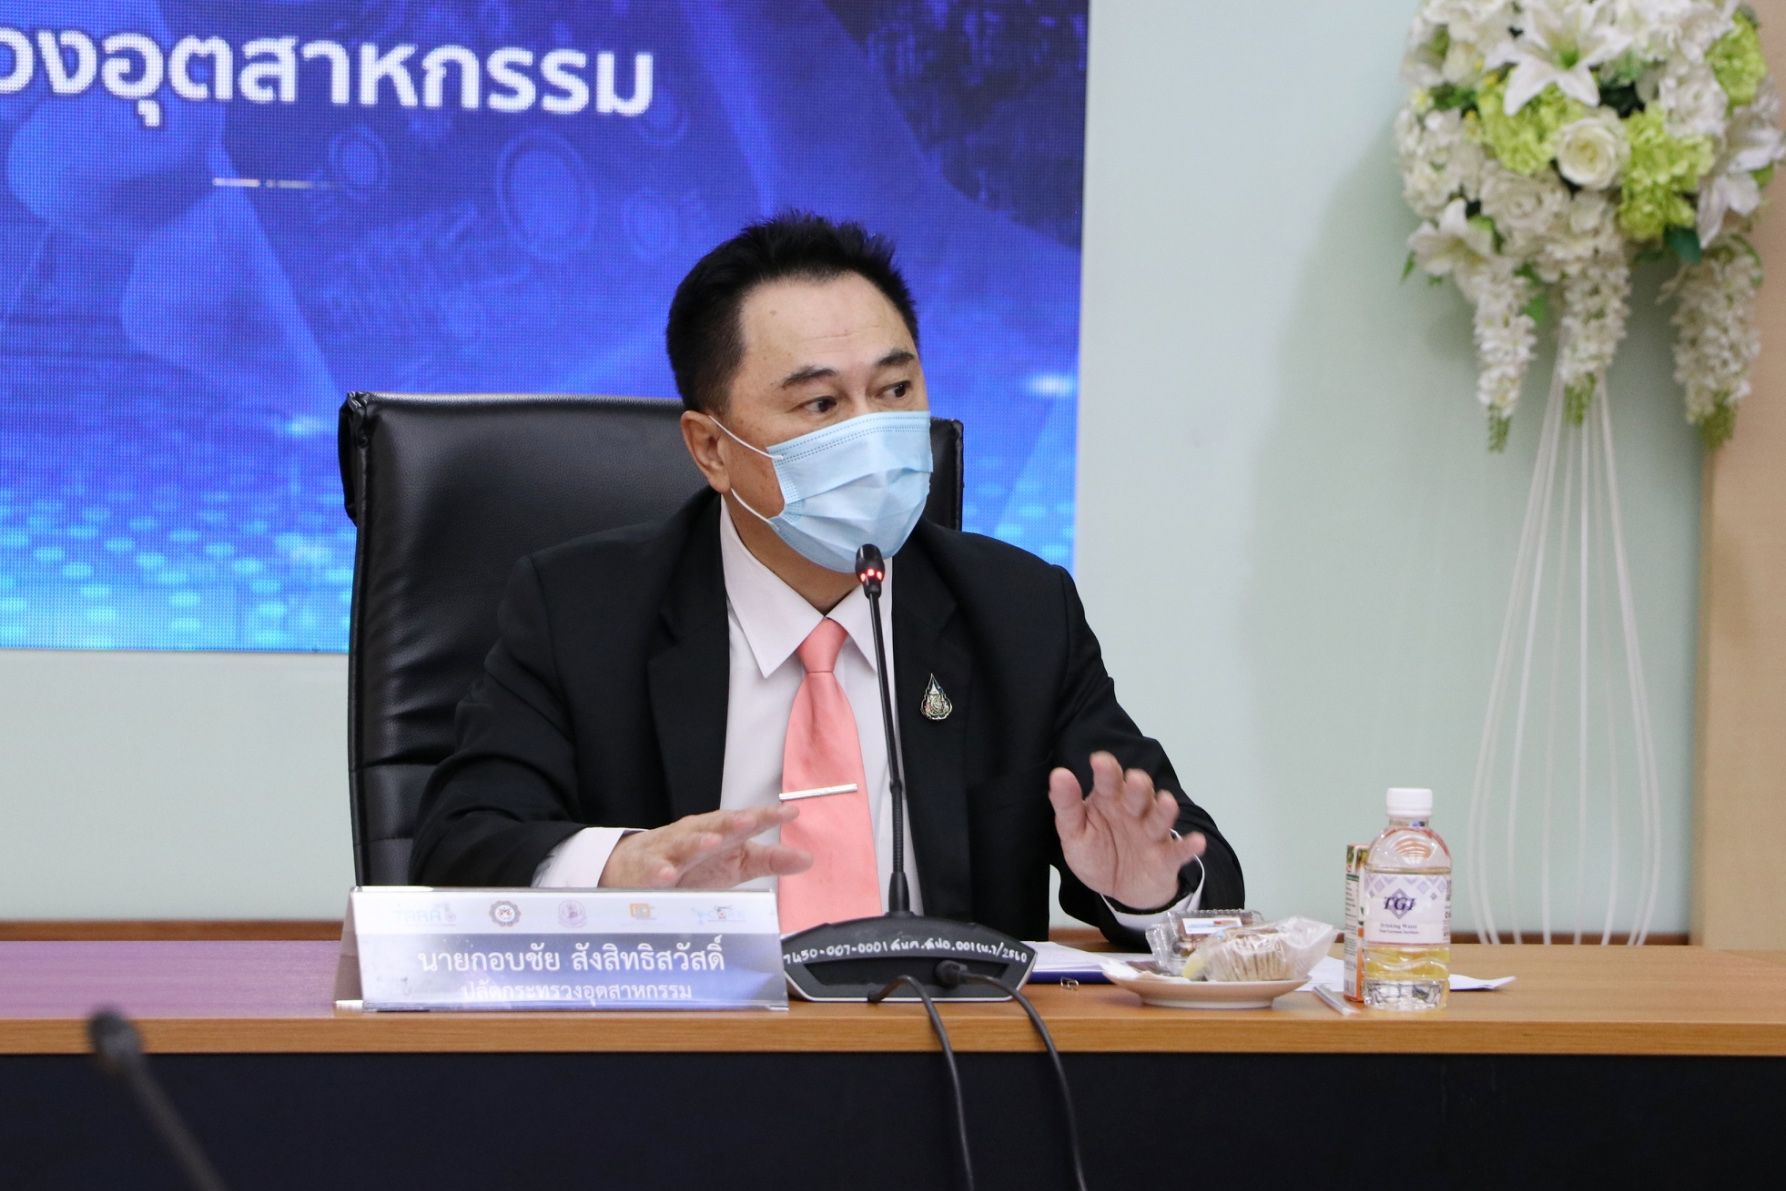 Press Conference 4.0 Revolution Towards Smart Industry: Thailand 4.0